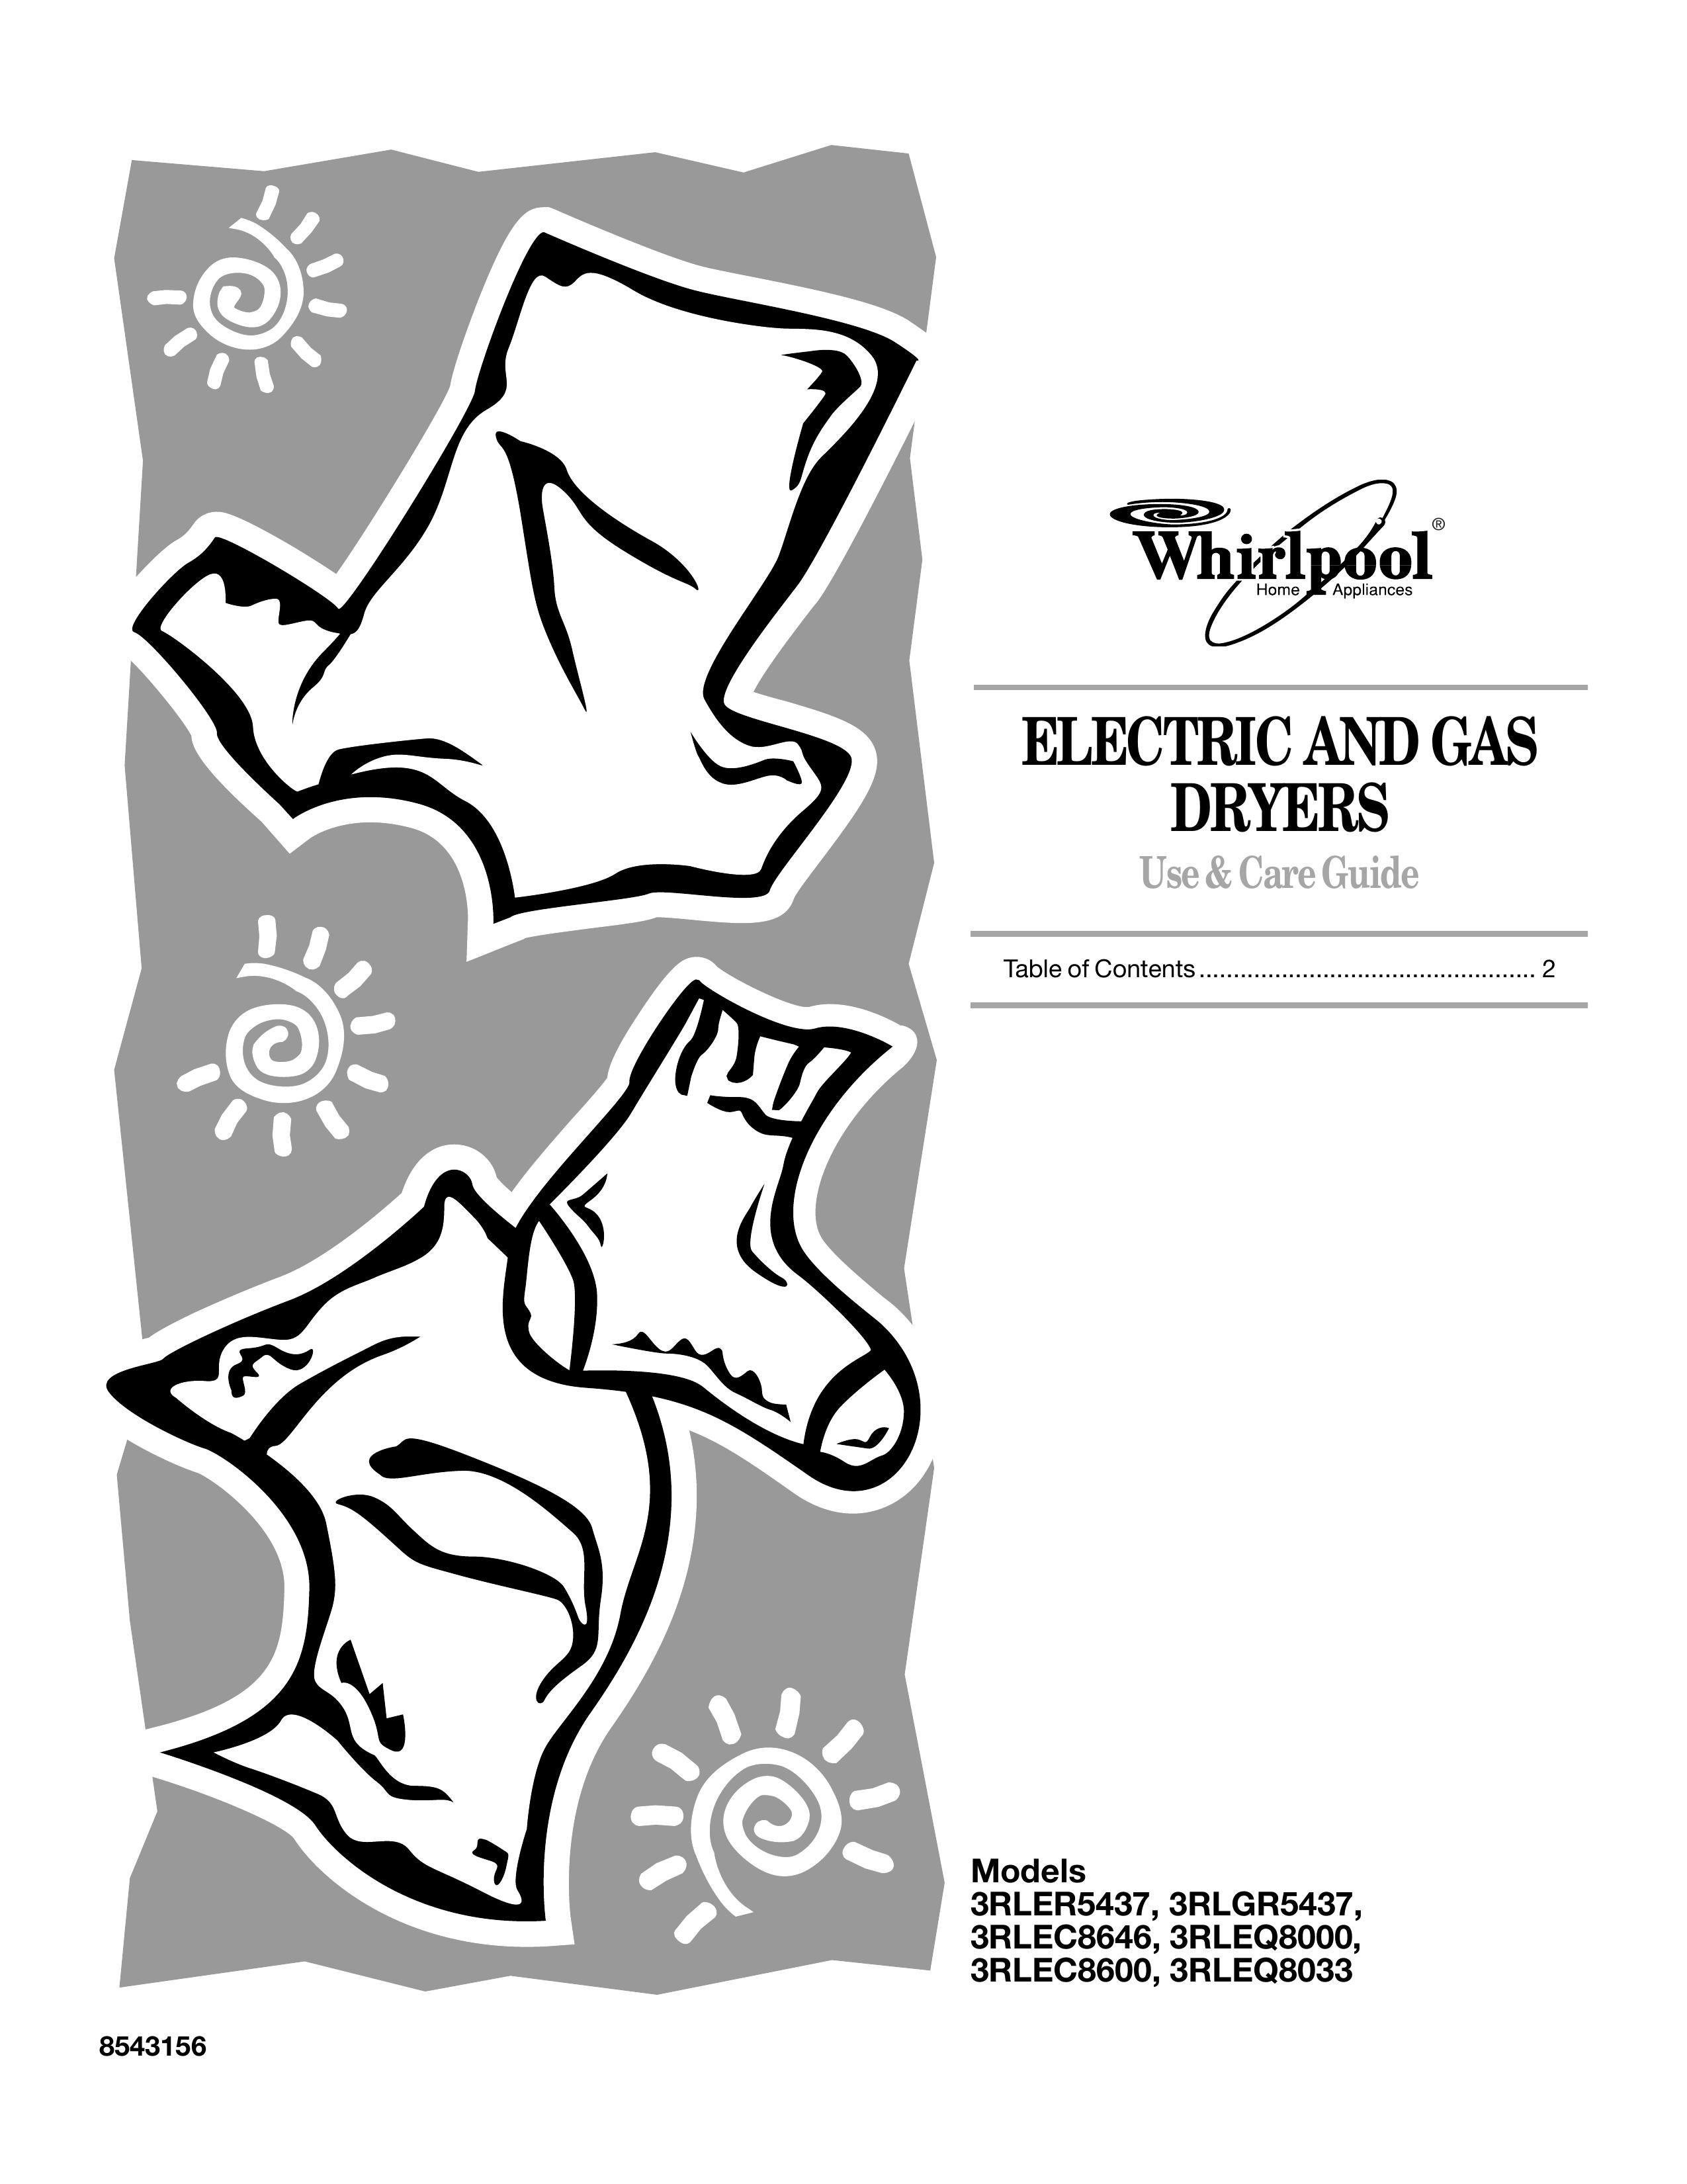 Whirlpool 3RLEC8600 Clothes Dryer User Manual